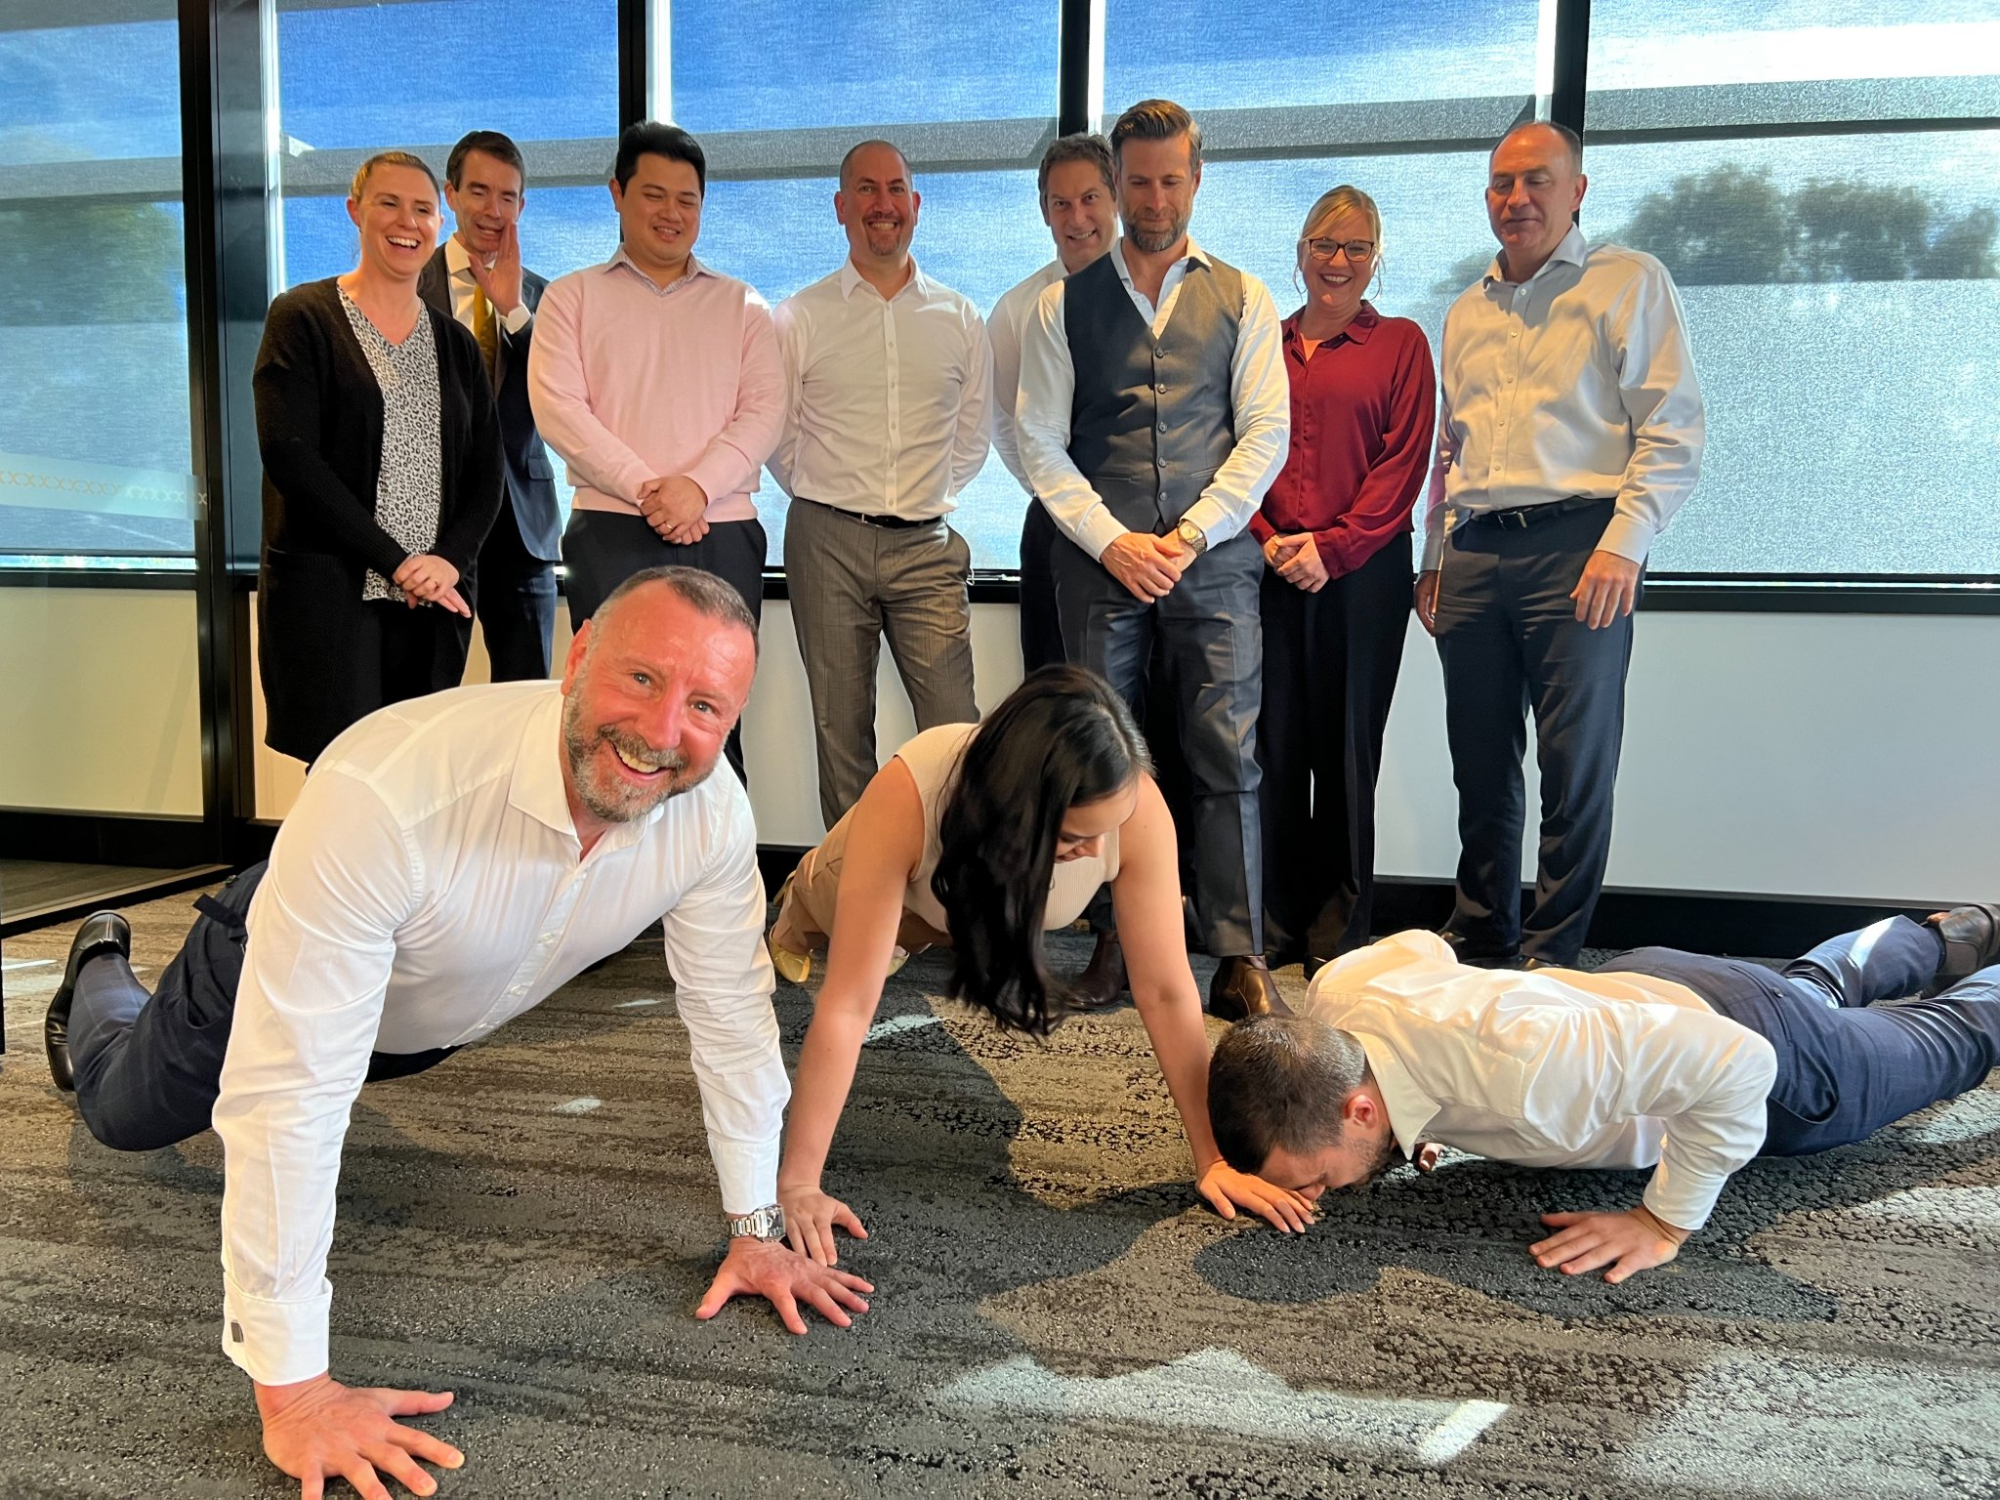 Ledge team completing push ups as part of The Push-Up Challenge.